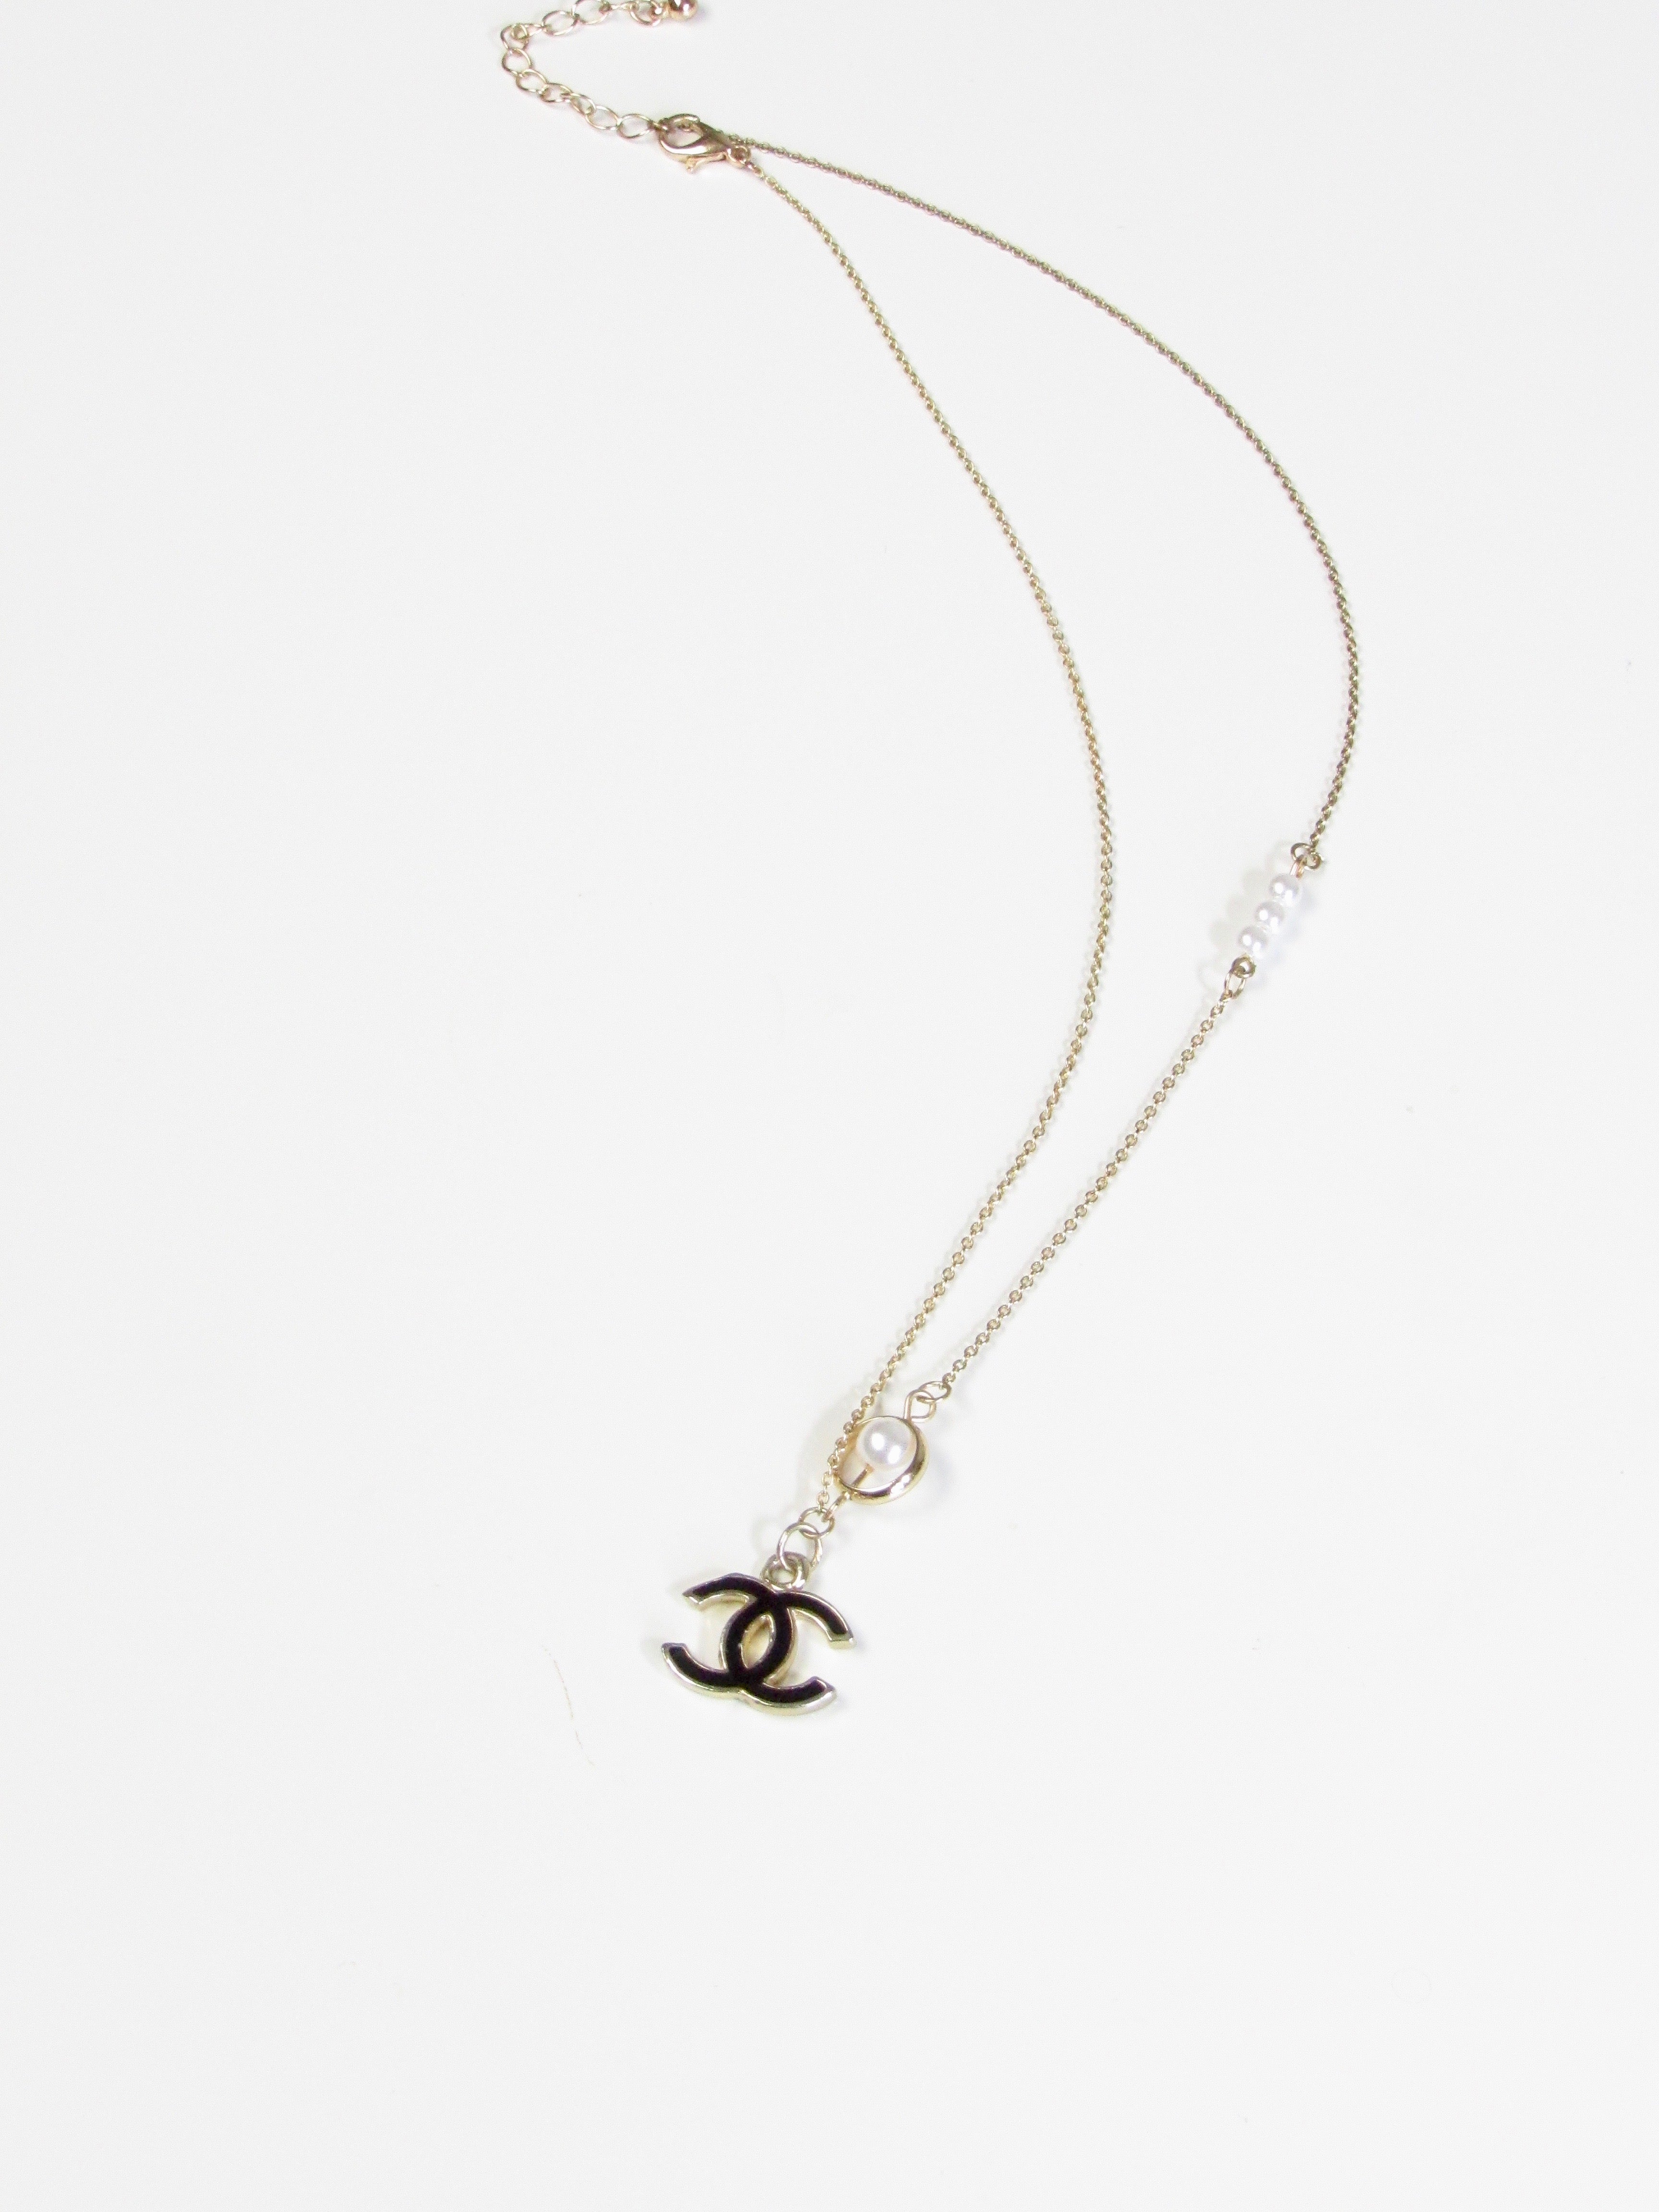 Reconstructed Chanel Logo Charm Gold Pendant Necklace